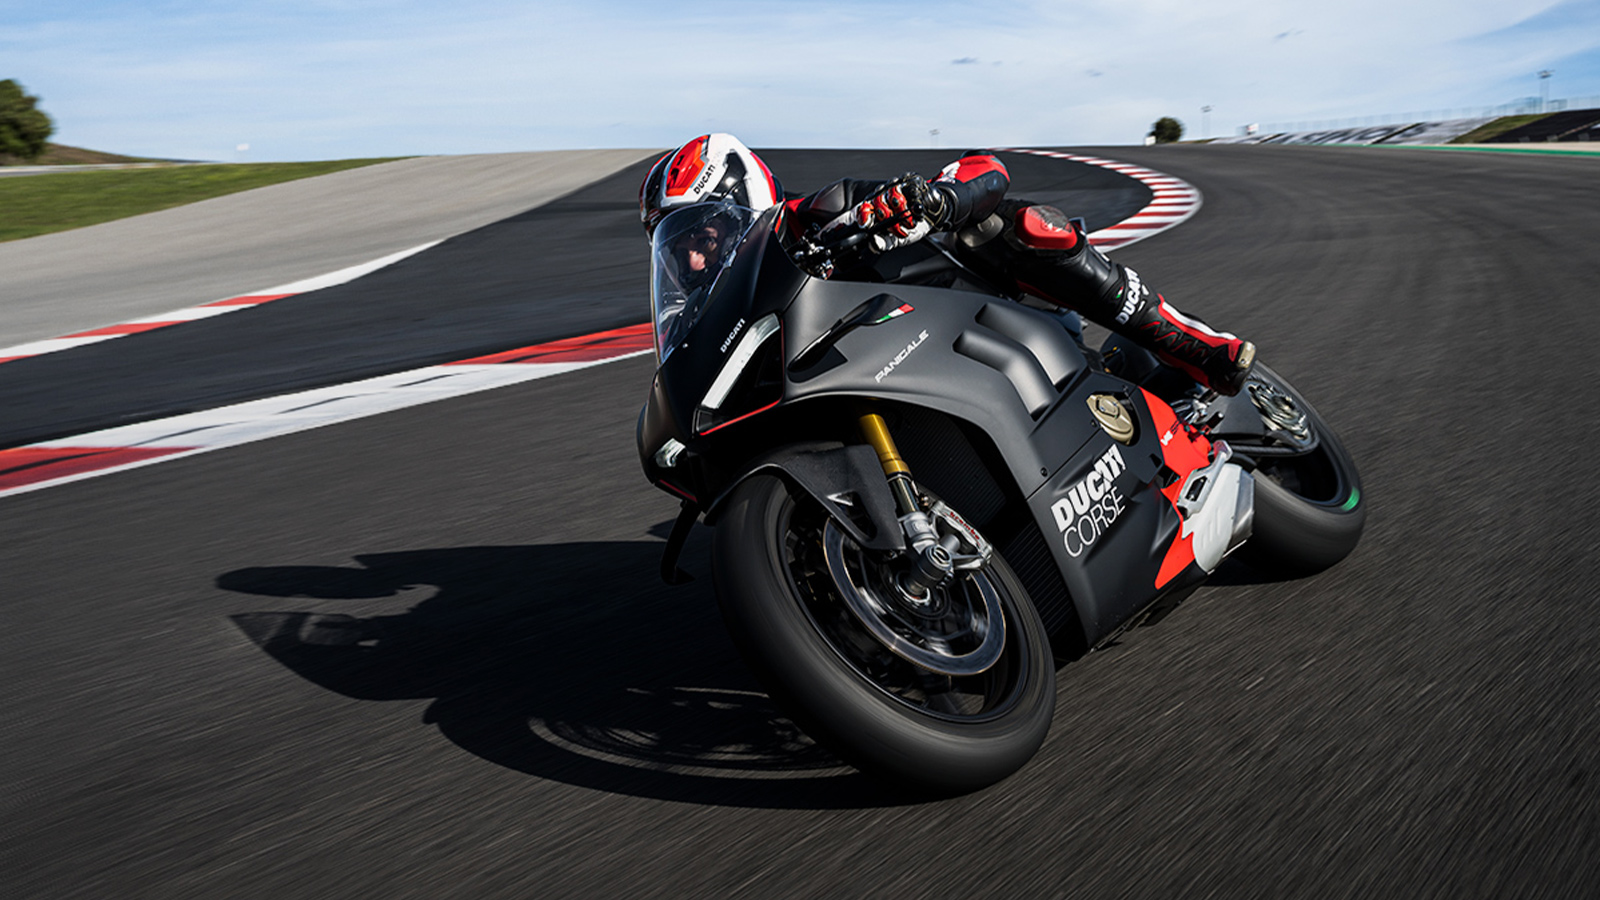 2023 Ducati Panigale V4 SP2 Is Described As “The Ultimate Racetrack Machine”